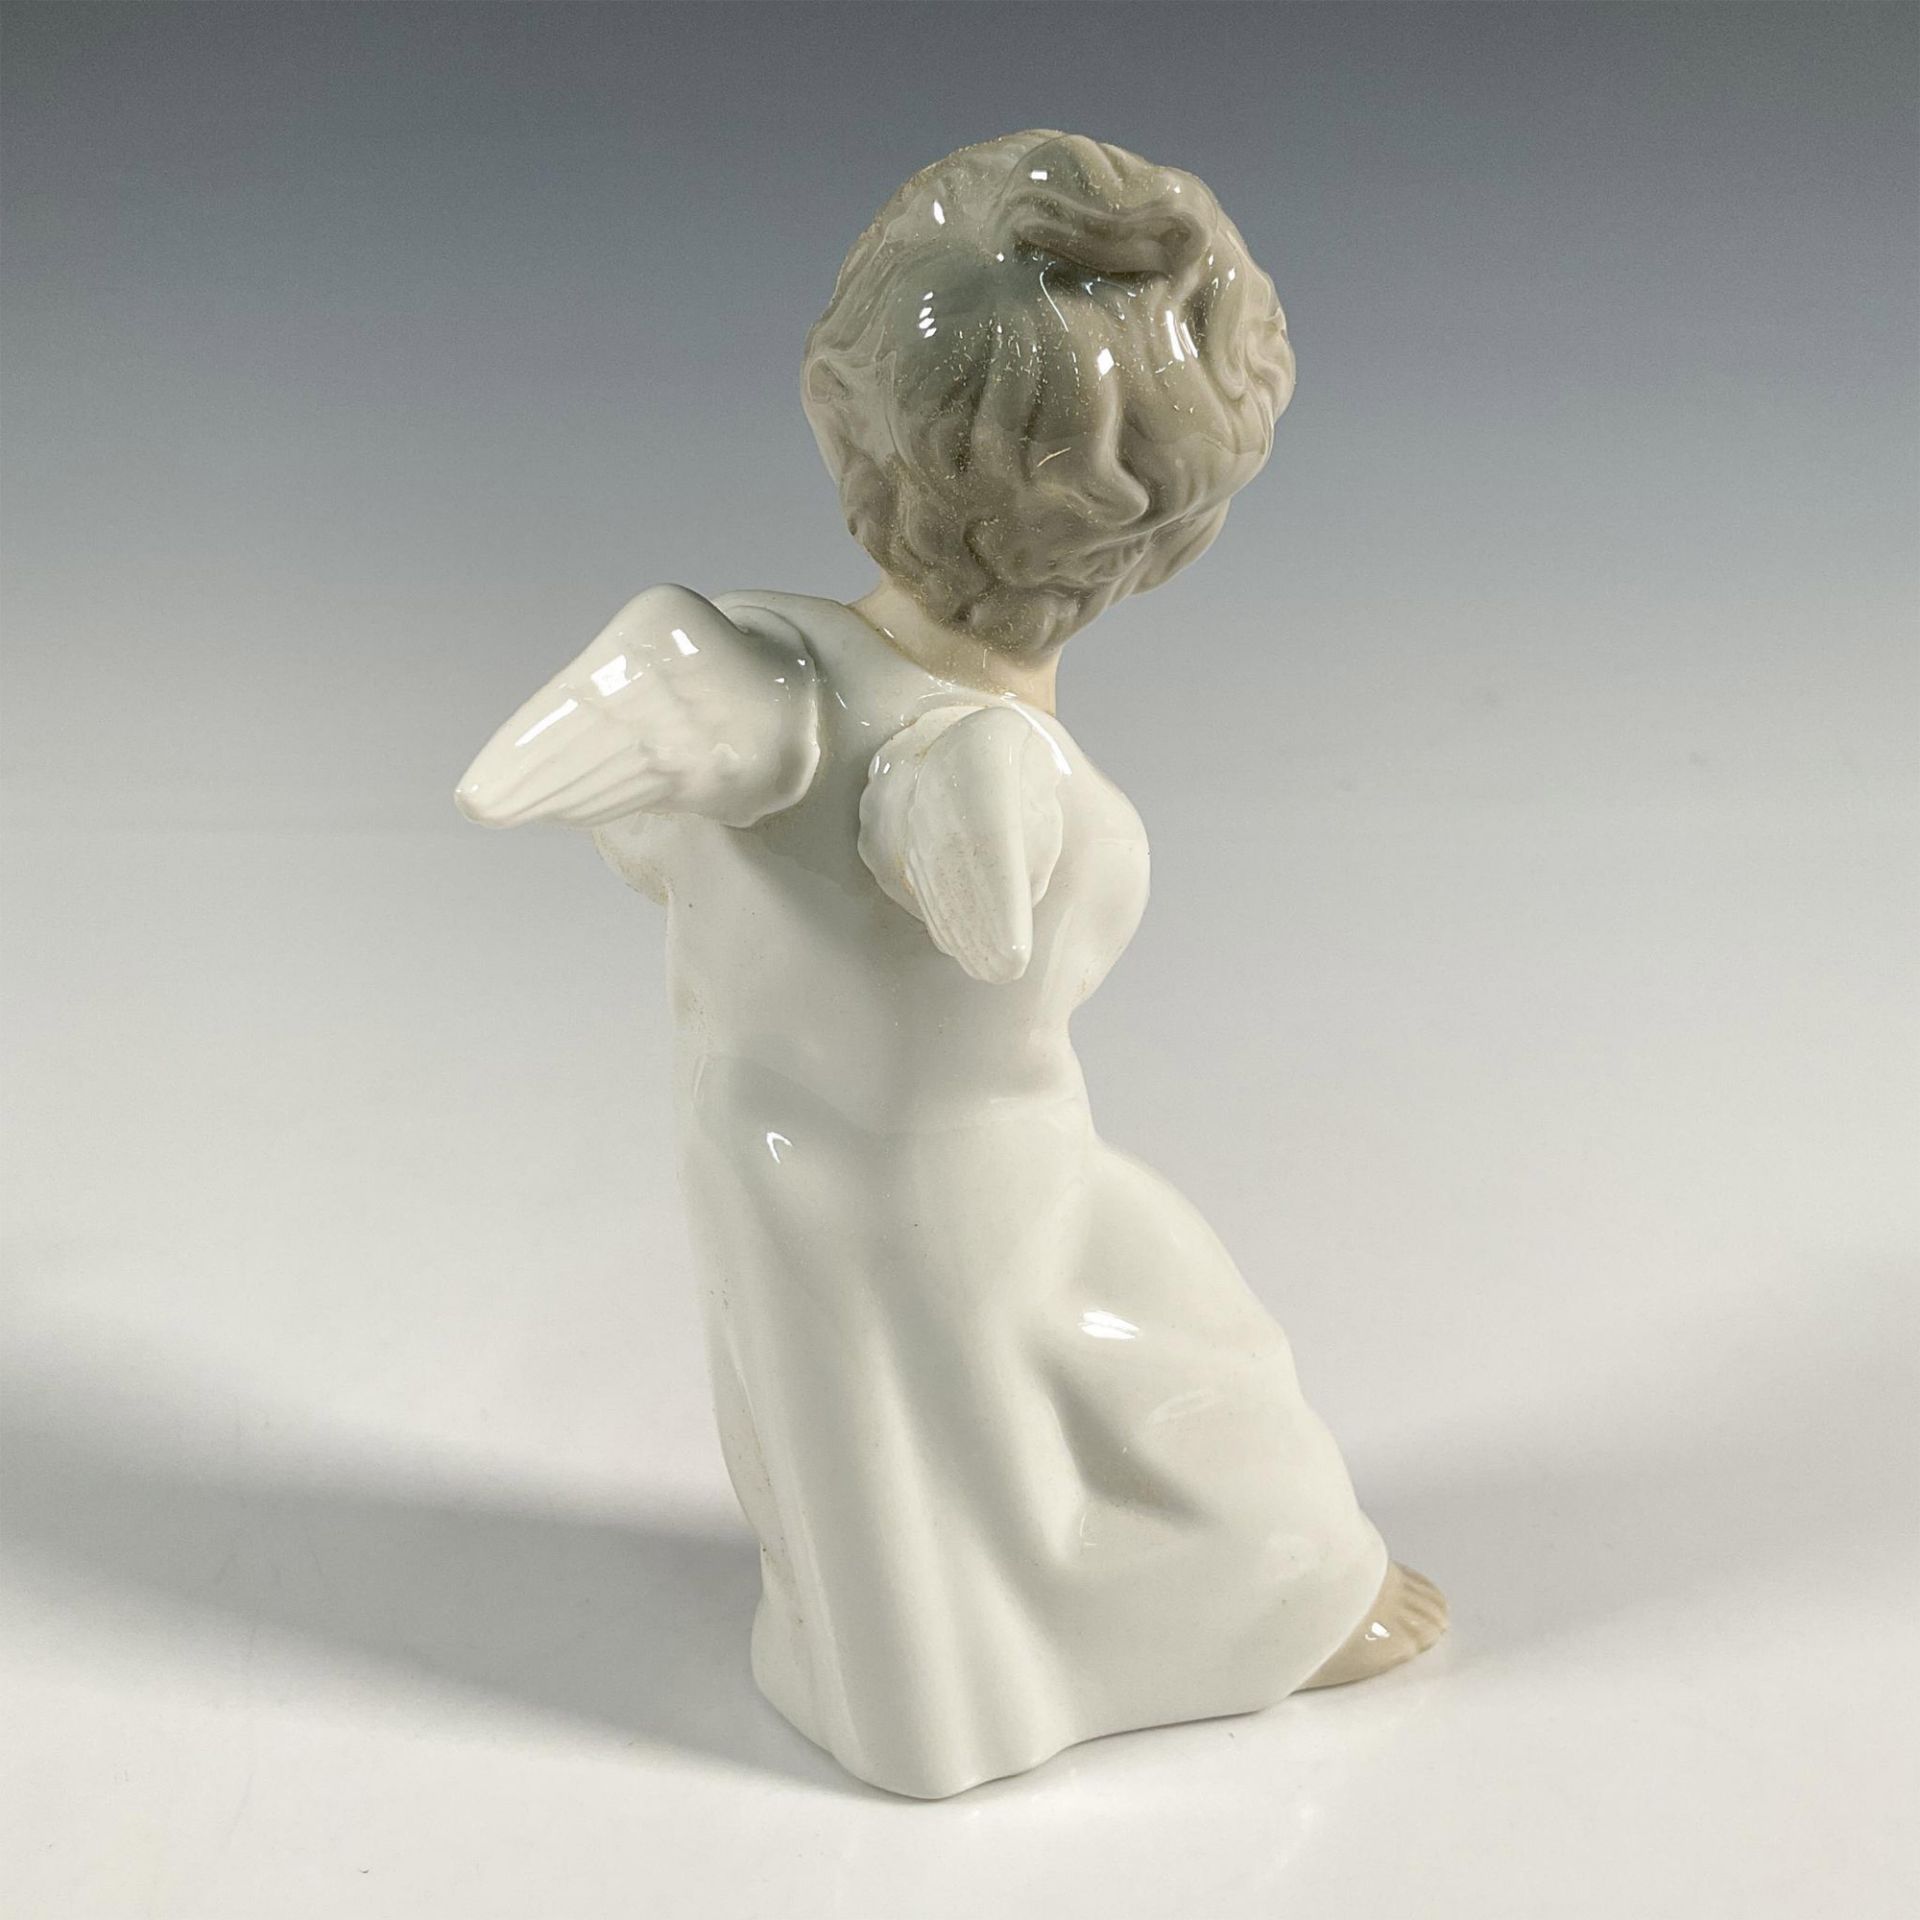 Angel with Flute 1004540 - Lladro Porcelain Figurine - Image 2 of 4